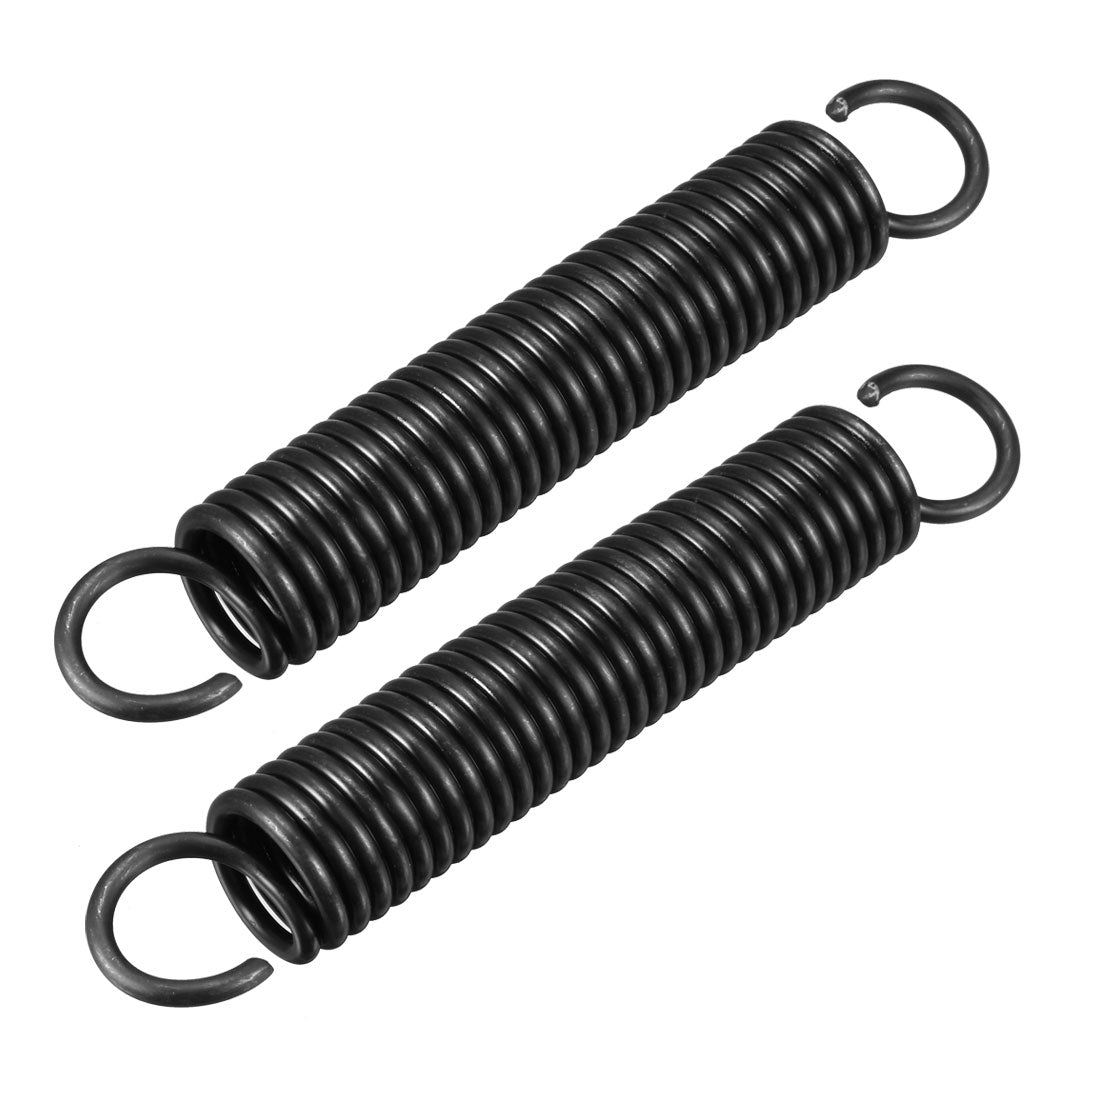 Uxcell Uxcell 2.5mm Wire Diax18mm ODx115mm Free Length Spring Steel Tension Spring 2pcs